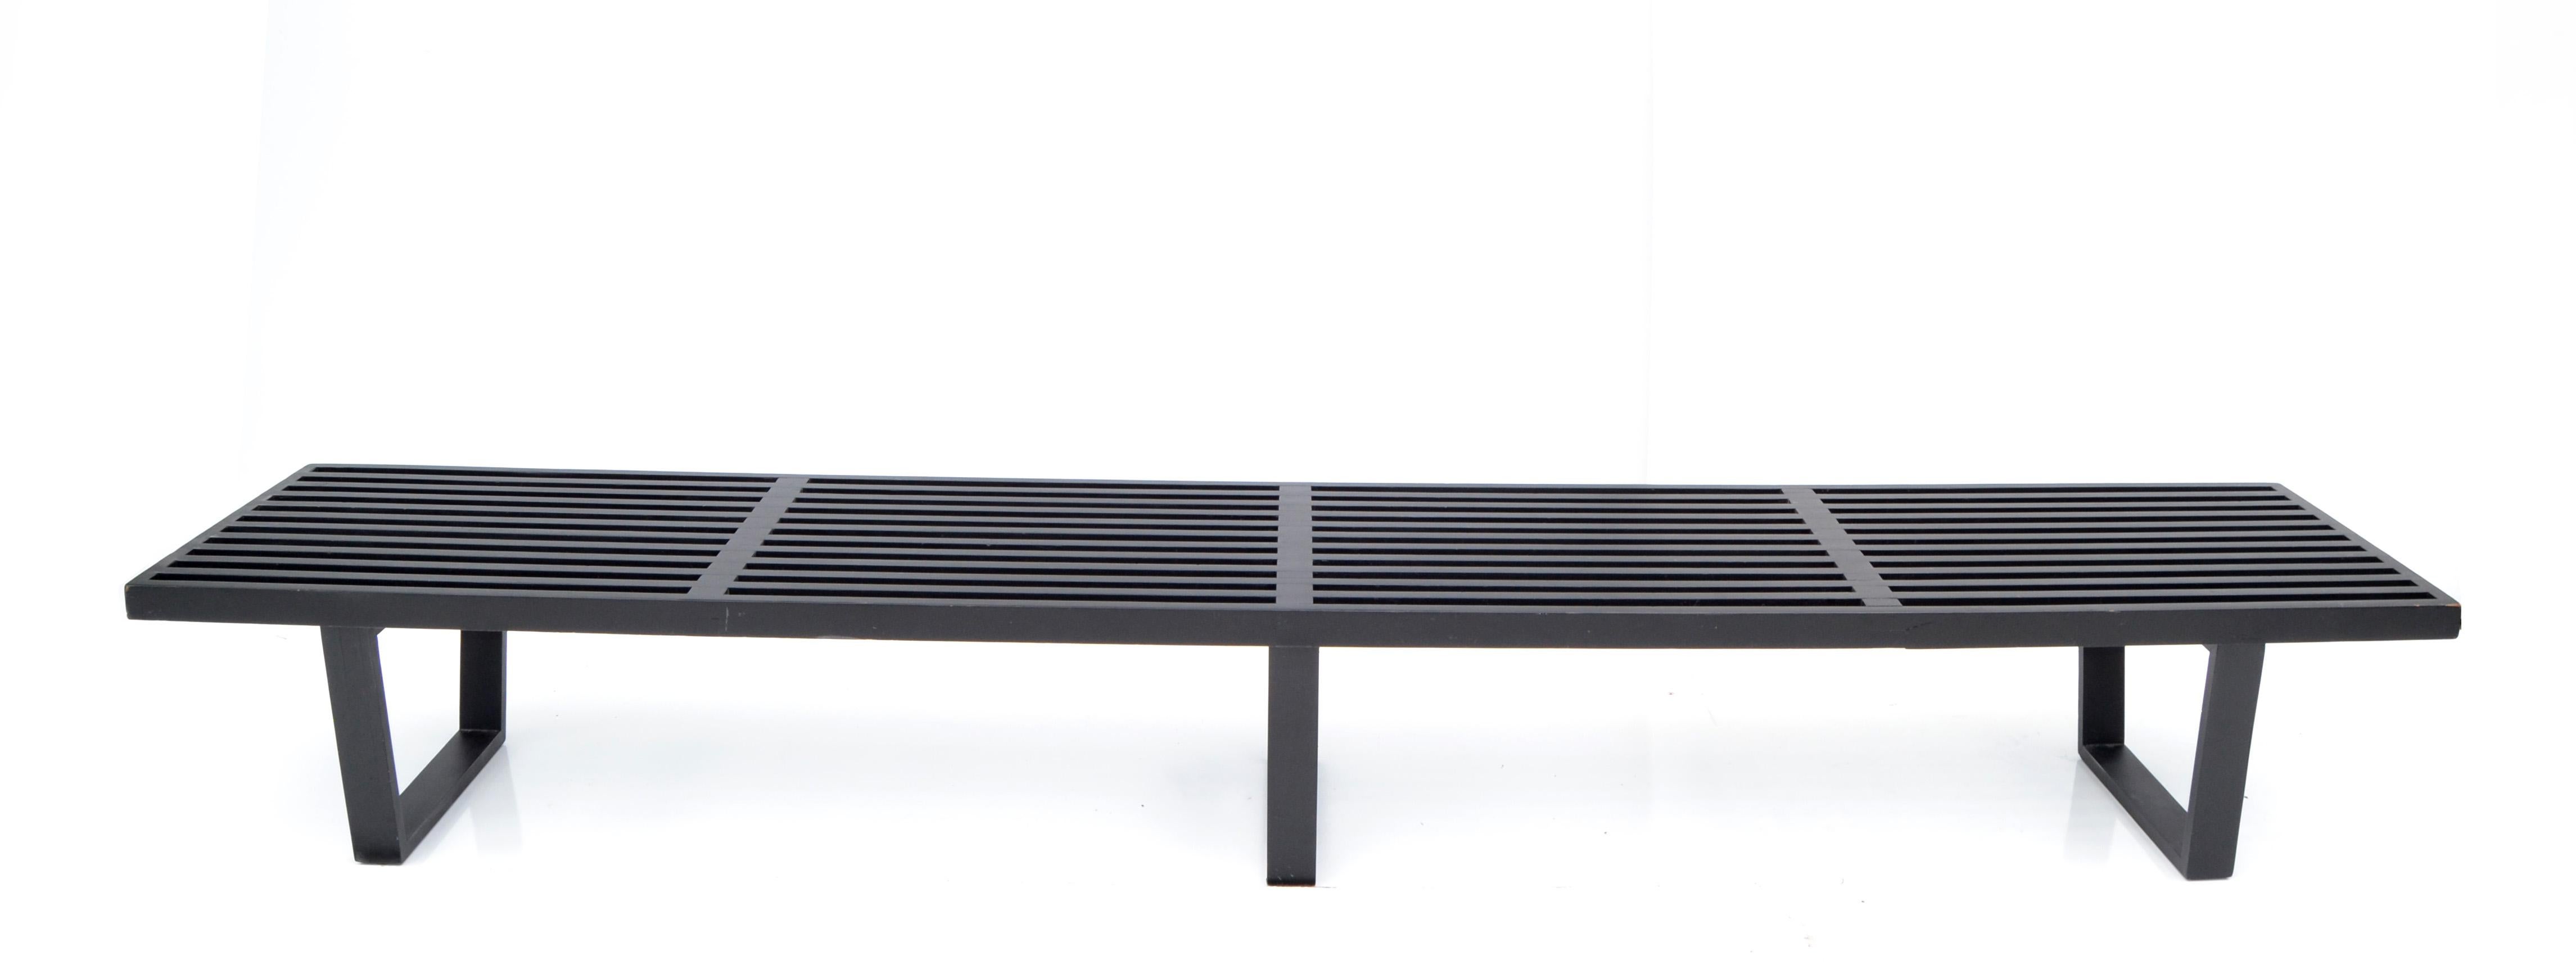 Original George Nelson early long slat bench in ebonized Birch Wood designed in the 1950s and manufactured by Herman Miller.
Great for a Hallway Bench where Kids can change Shoes and clothing or even as a Coffee Table.
In used good condition with